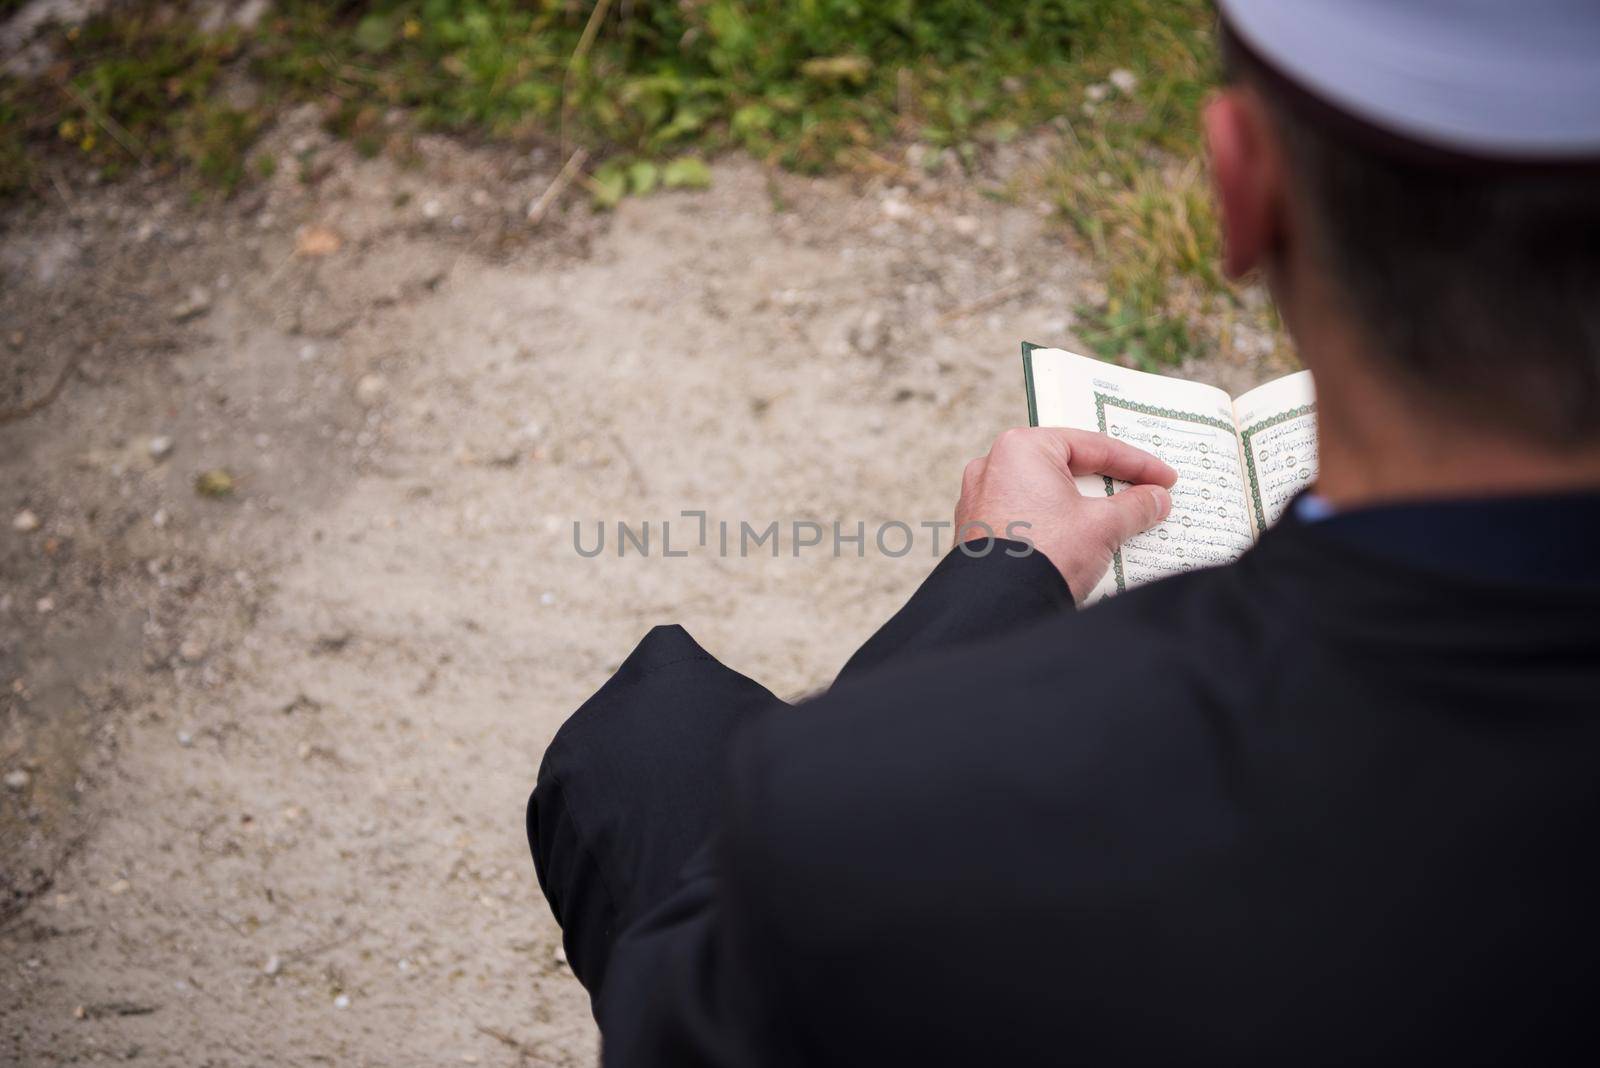 quran holy book reading by imam  on islamic funeral with white thumb stones graweyard background